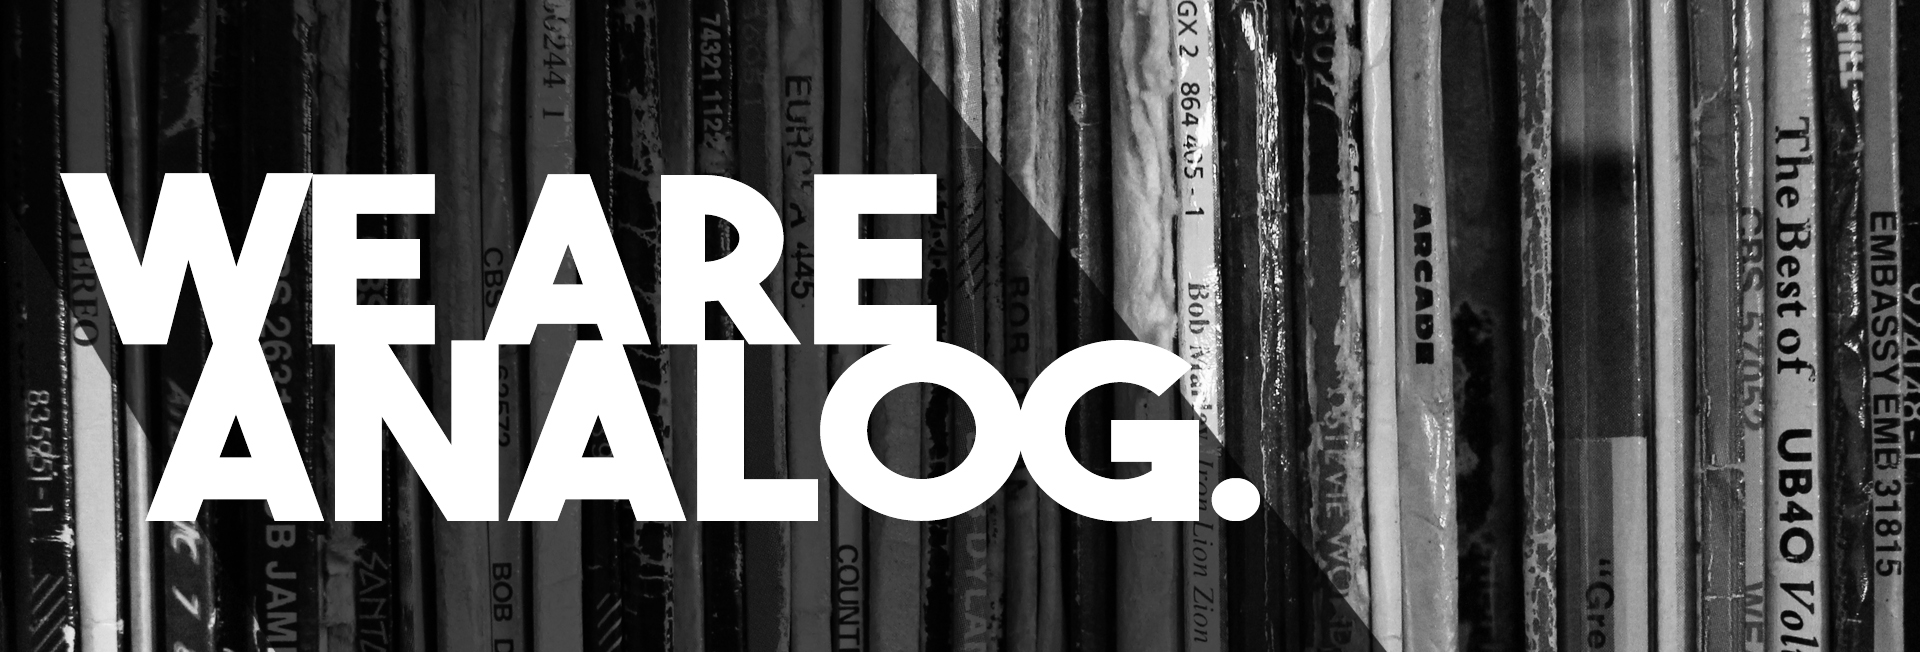 we are analog